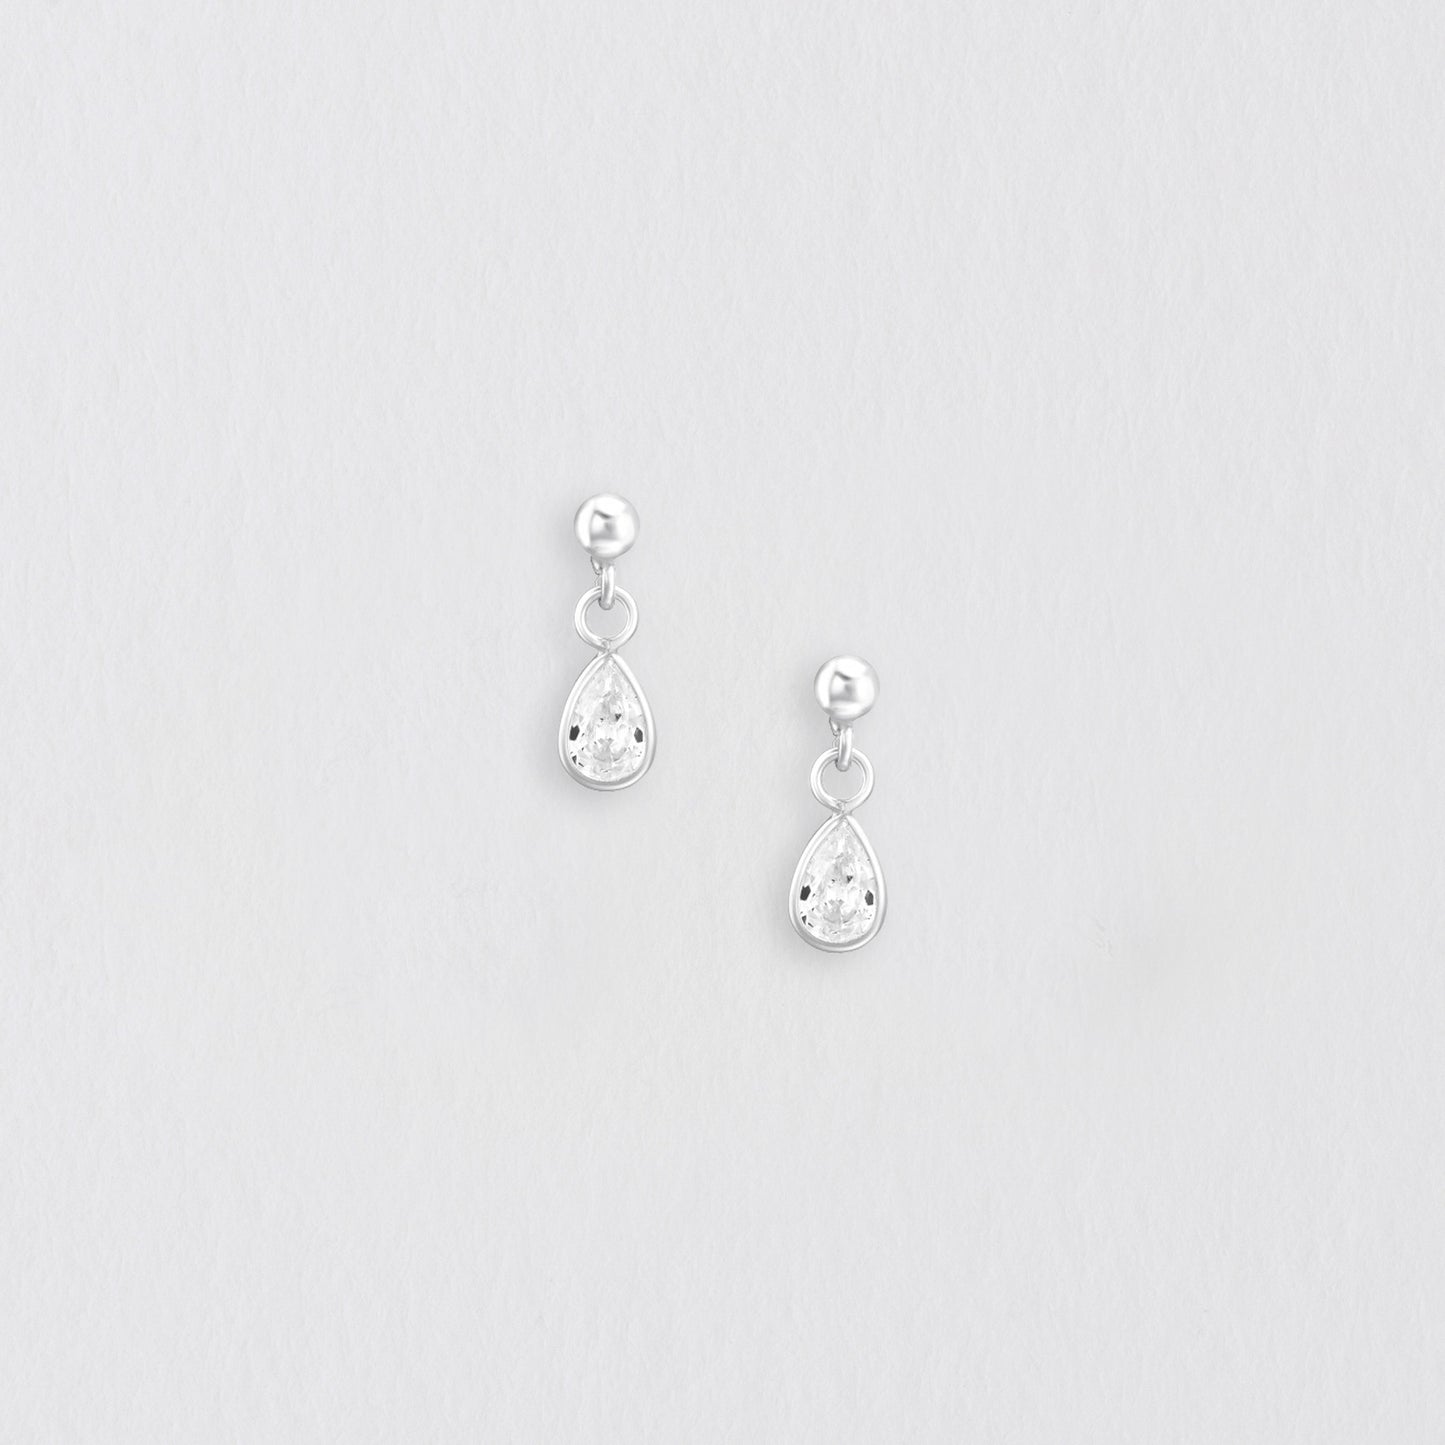 Dangly CZ Silver Earring Stud Earrings Crumble and Core   